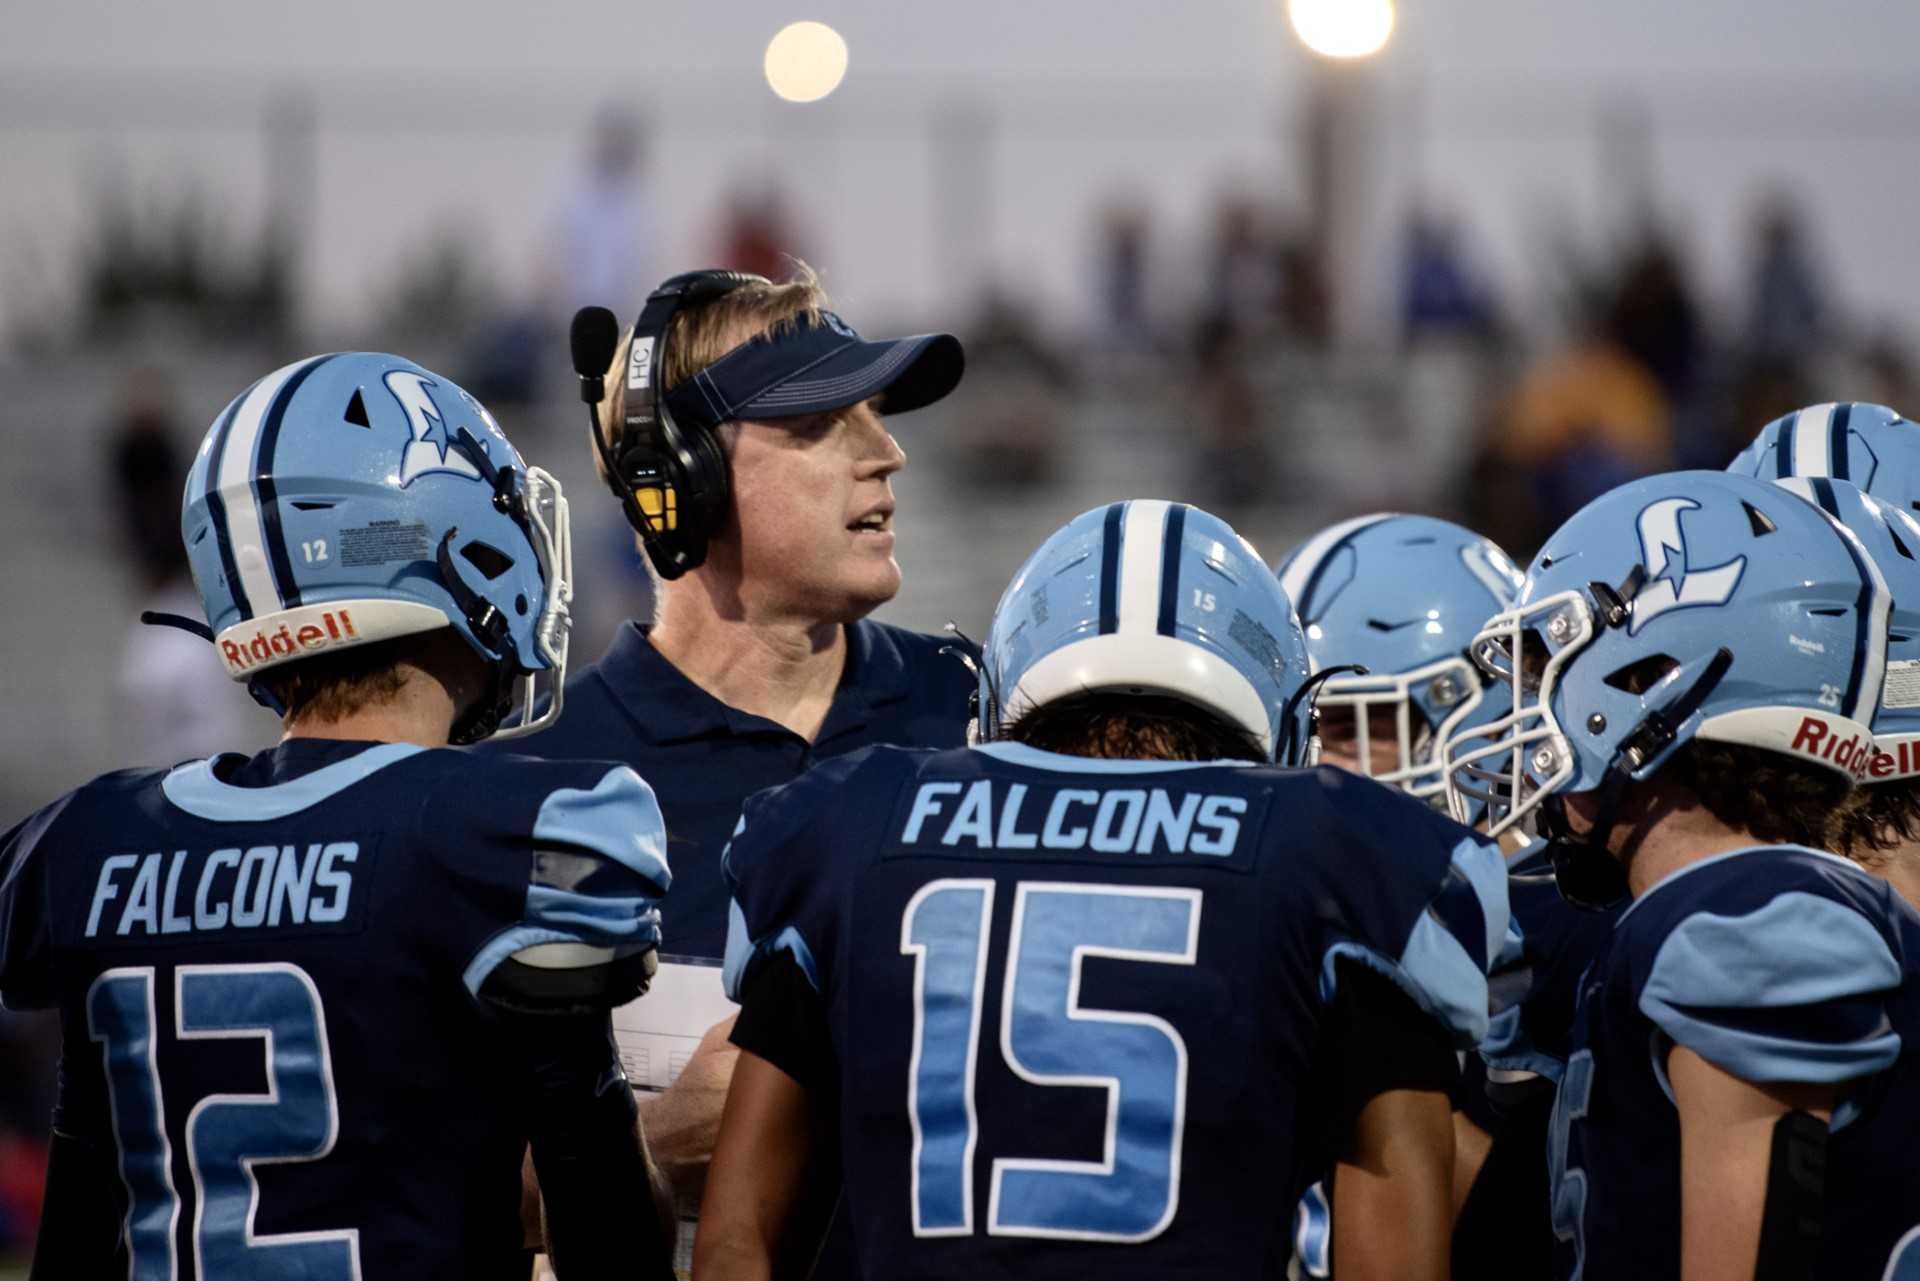 Eric Mahlum coached Liberty's football team into the state quarterfinals three times since 2014. (Photo by Heidi Heaphy)